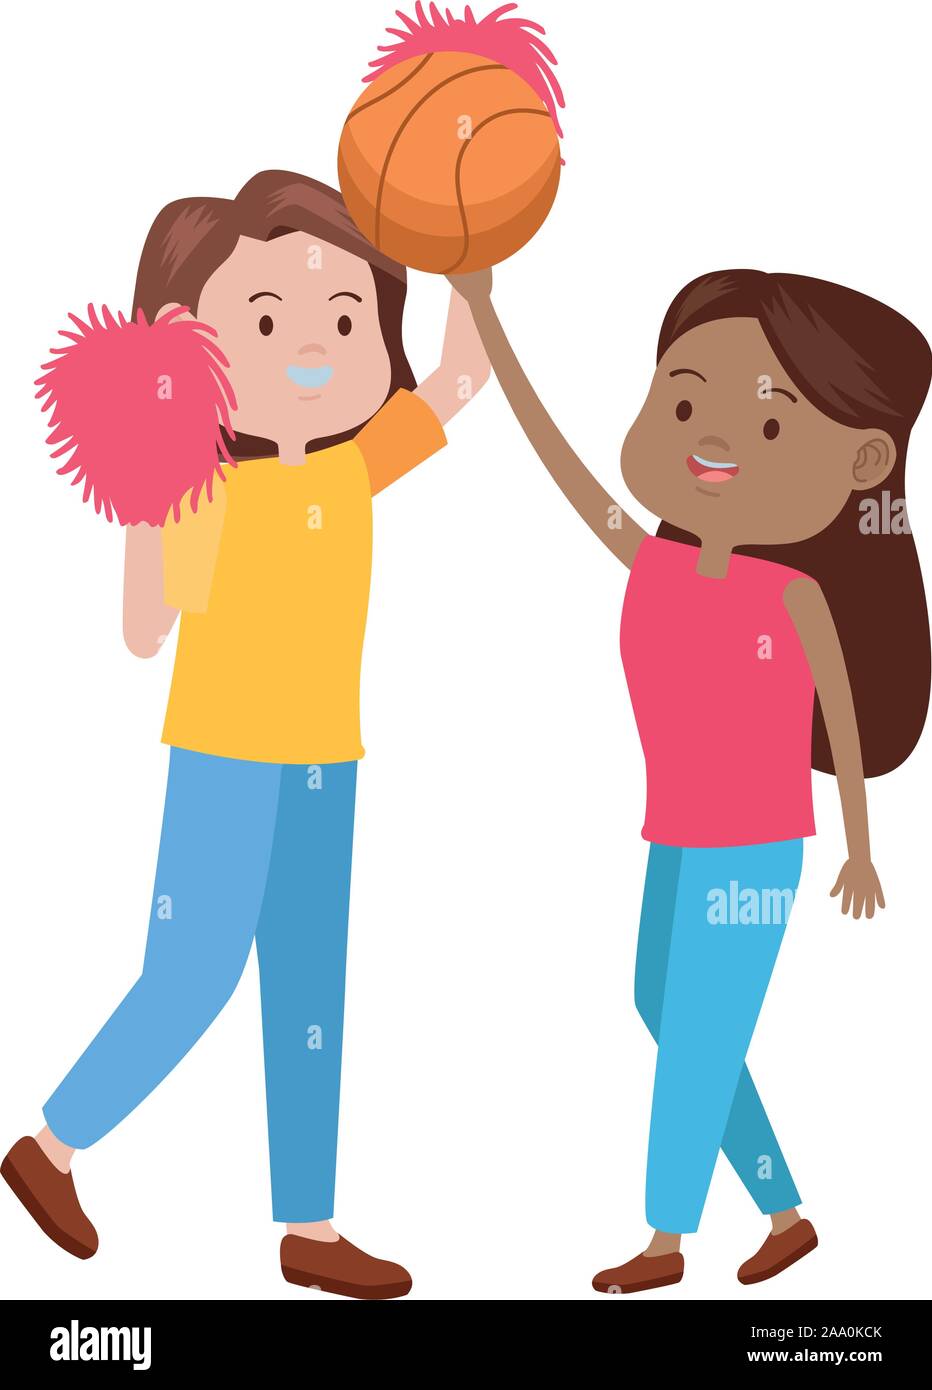 young women playing basketball and cheerleader Stock Vector